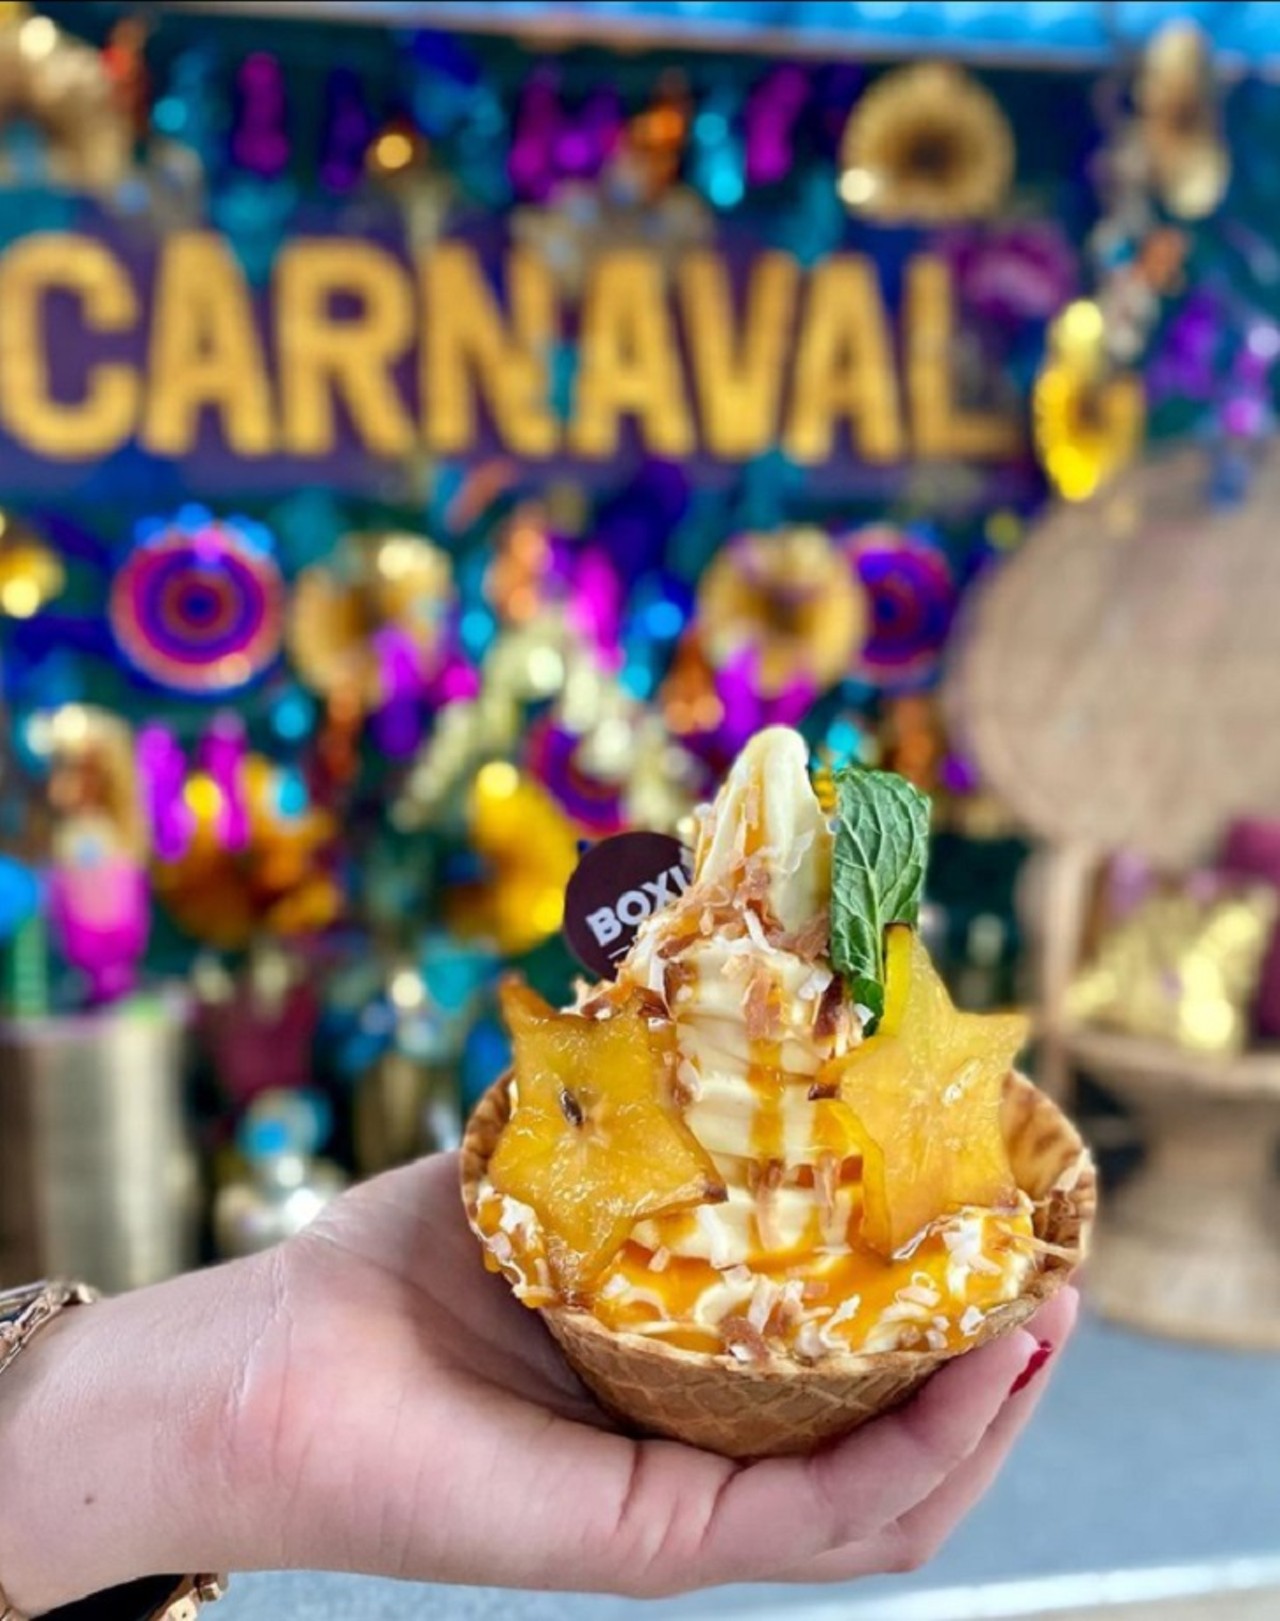 Before It Melts 
Boxi Park, Lake Nona
What&#146;s a trip to the park without a stop for ice cream? Lake Nona&#146;s Before it Melts in Boxi Park has your cravings covered. 
Photo via Boxi Park/Instagram